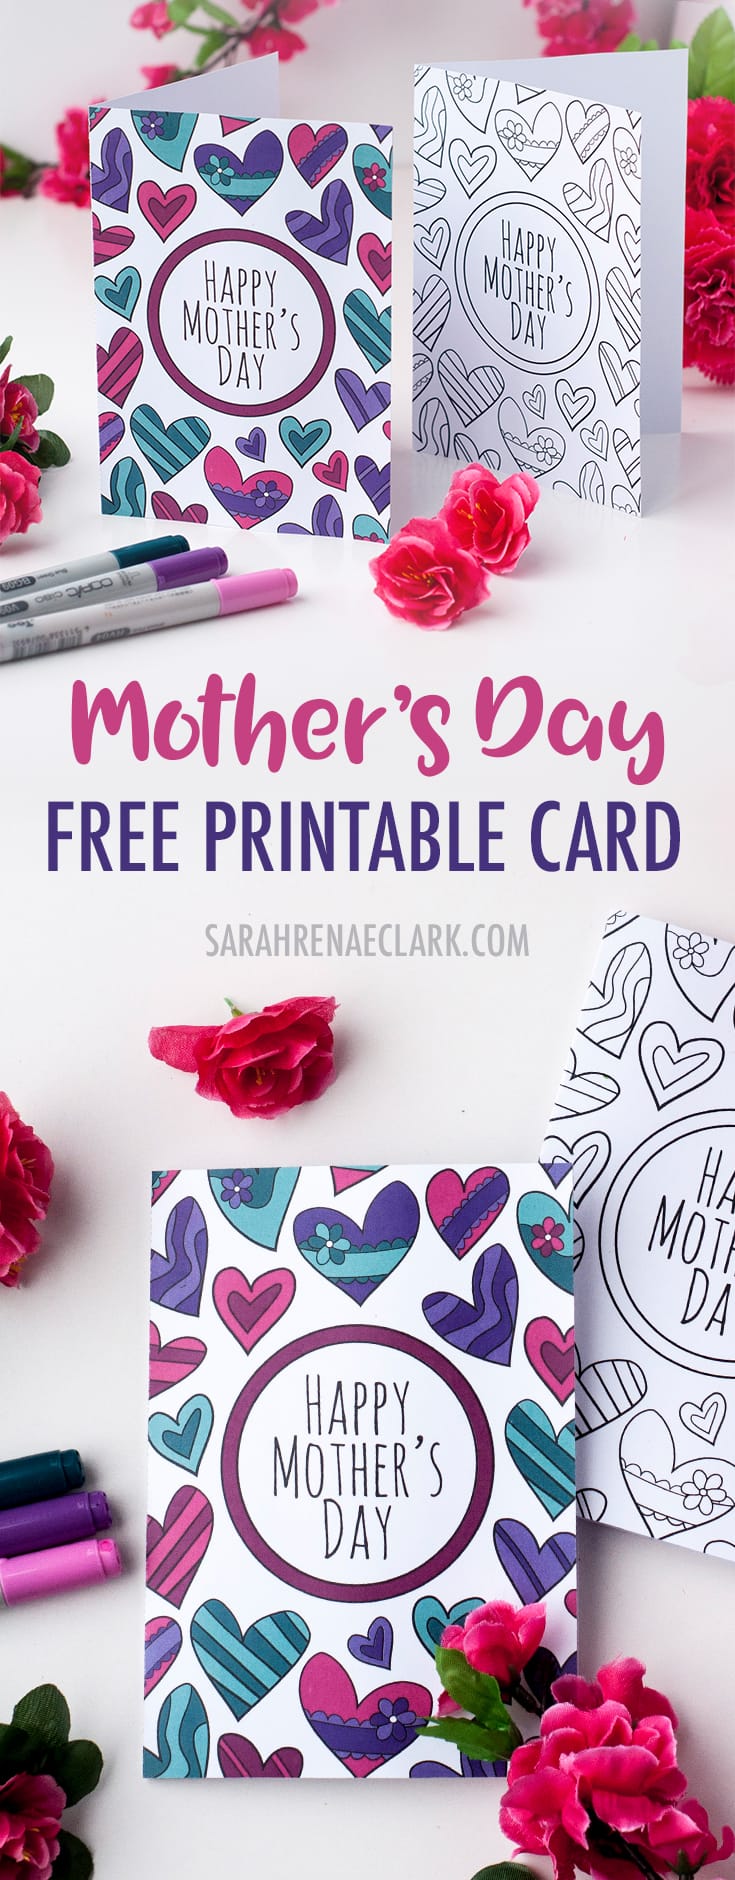 This free printable Mother’s Day card is fun to color in and a great way to personalize your Mother’s Day gift! This is a sample card from my pack of 8 coloring cards for Mother’s Day | Find more Mother’s Day printables and free coloring pages at https://sarahrenaeclark.com/shop/cat/seasonal/mothers-day/